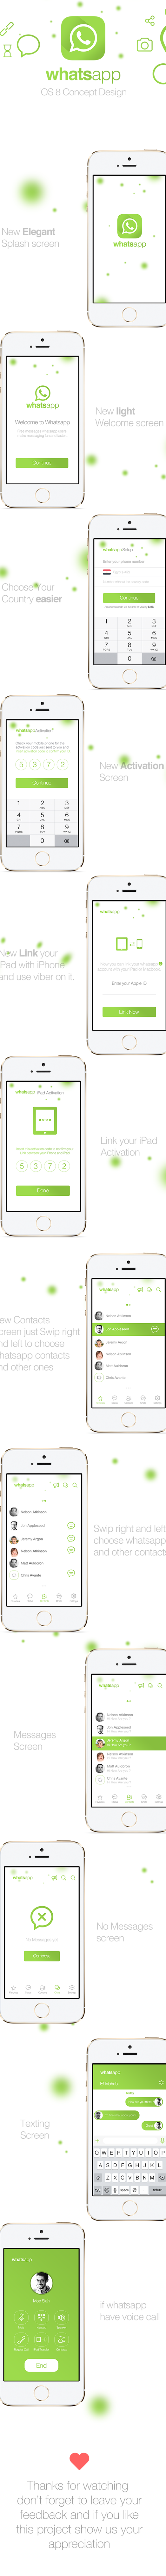 Whatsapp UI/UX Redesign for iOS 8